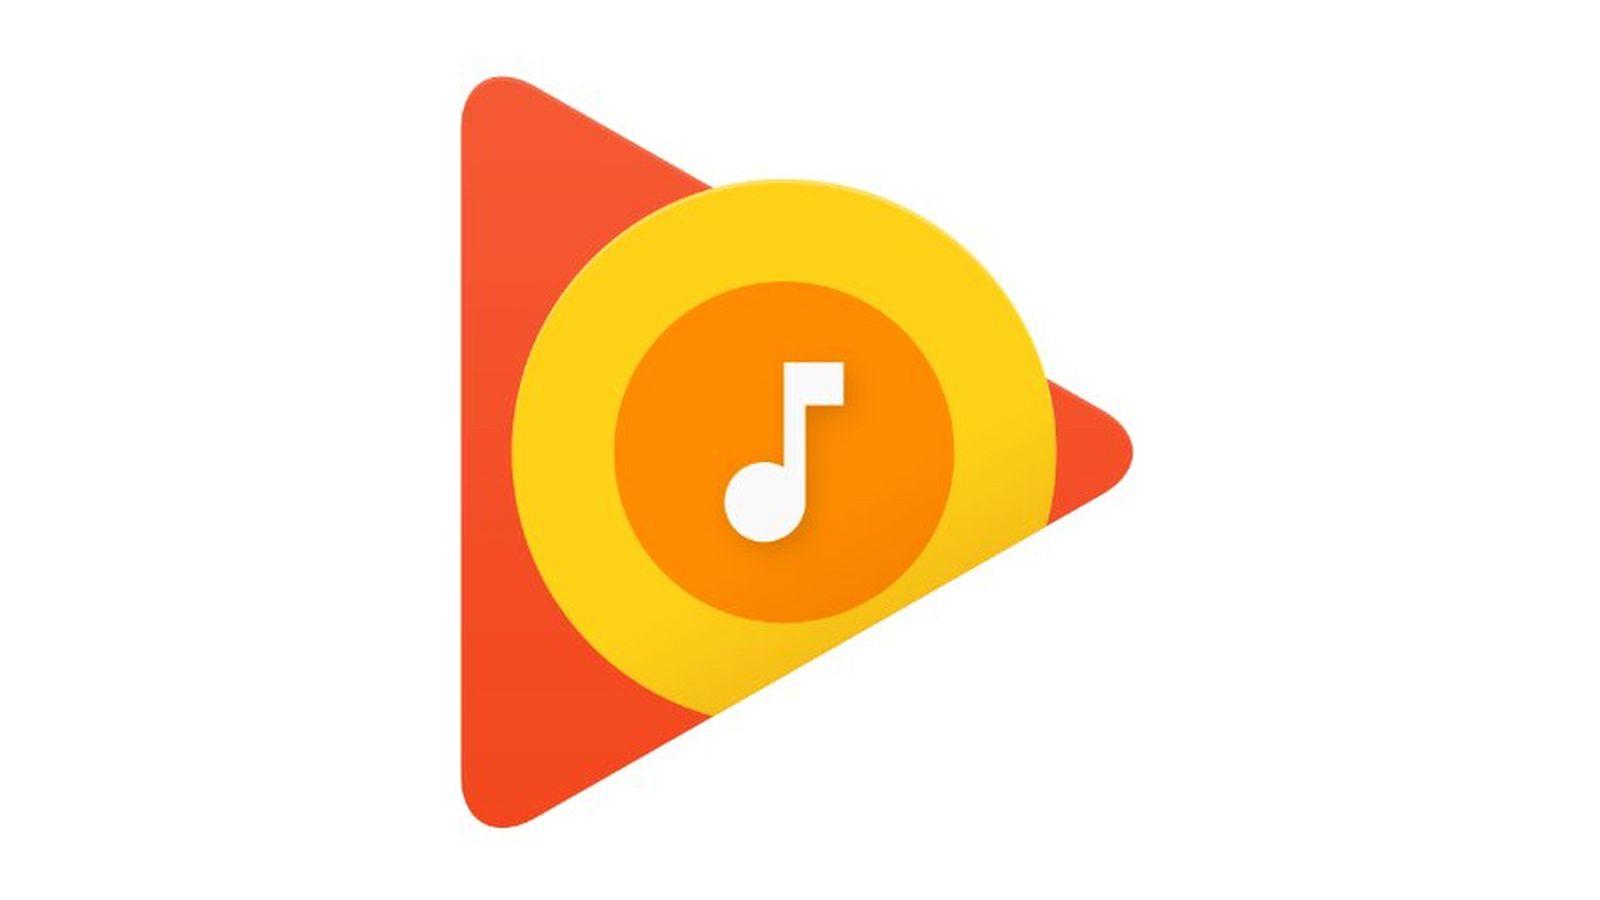 Google Play Music replaced its old headphones logo with breakfast